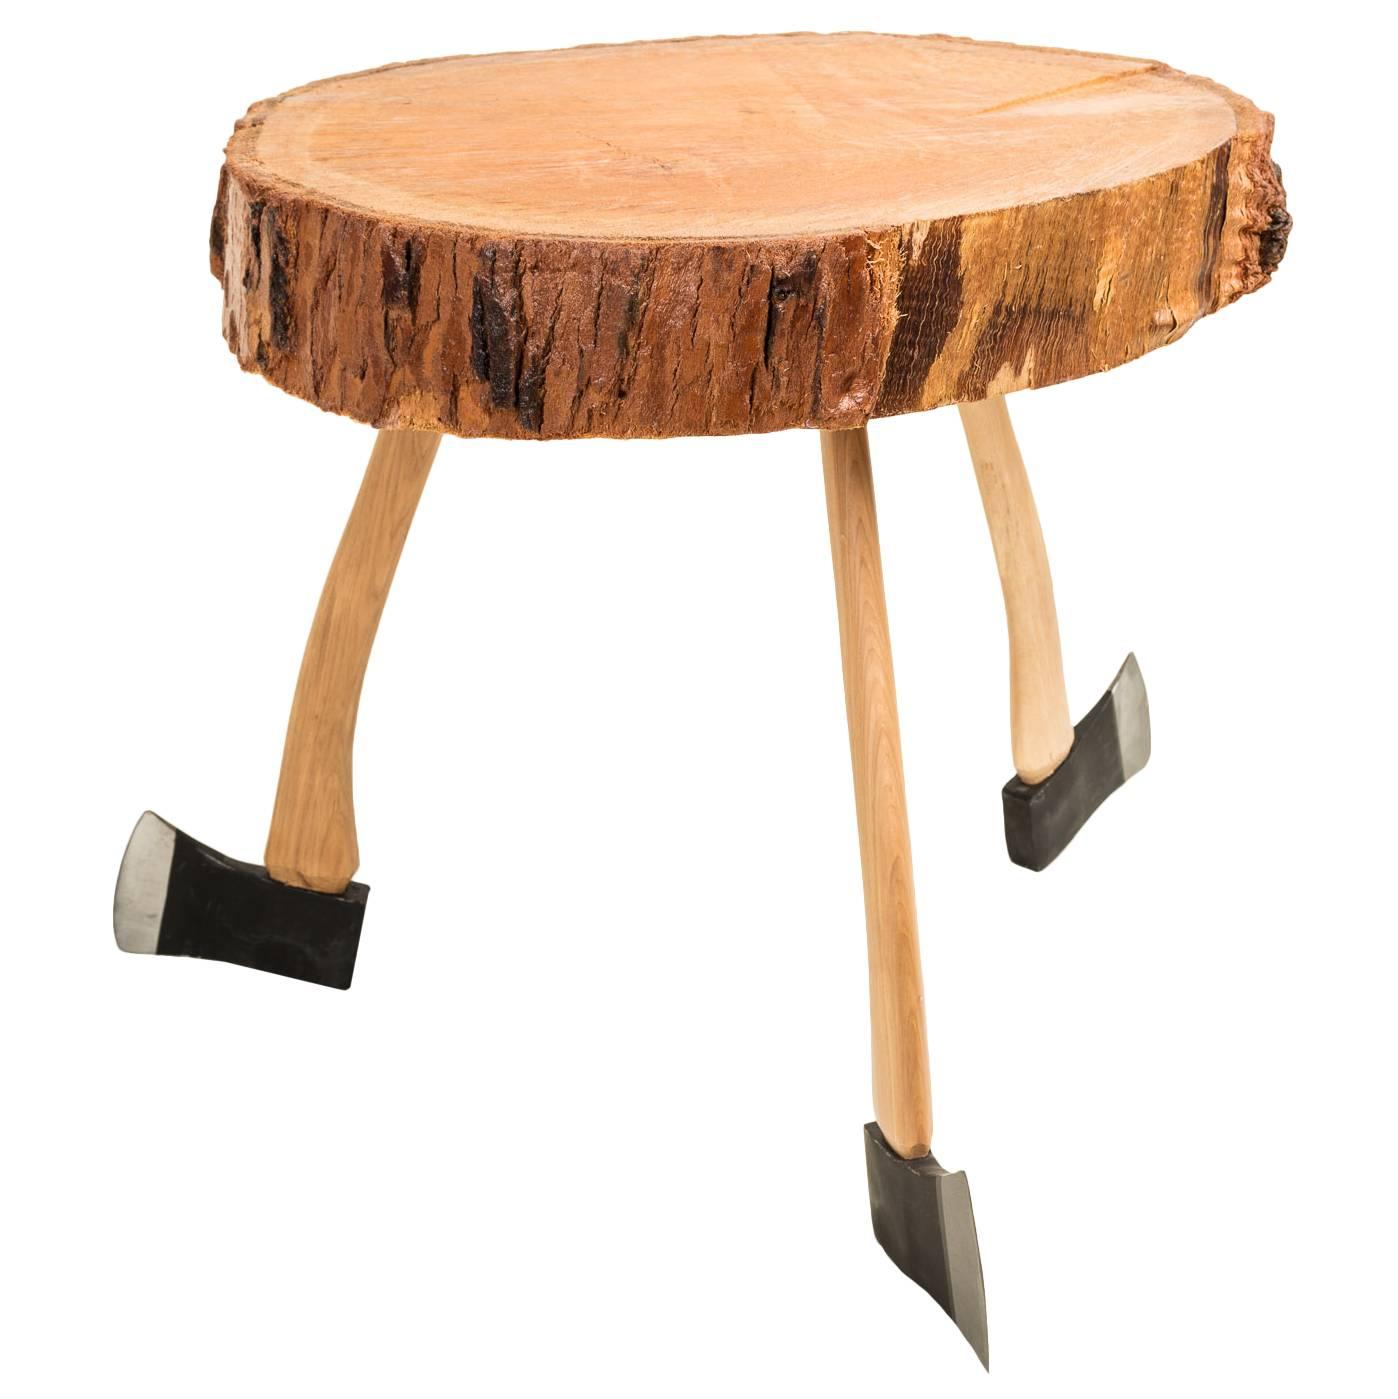 Axe Handle Base Rustic Pine Coffee Table For Sale